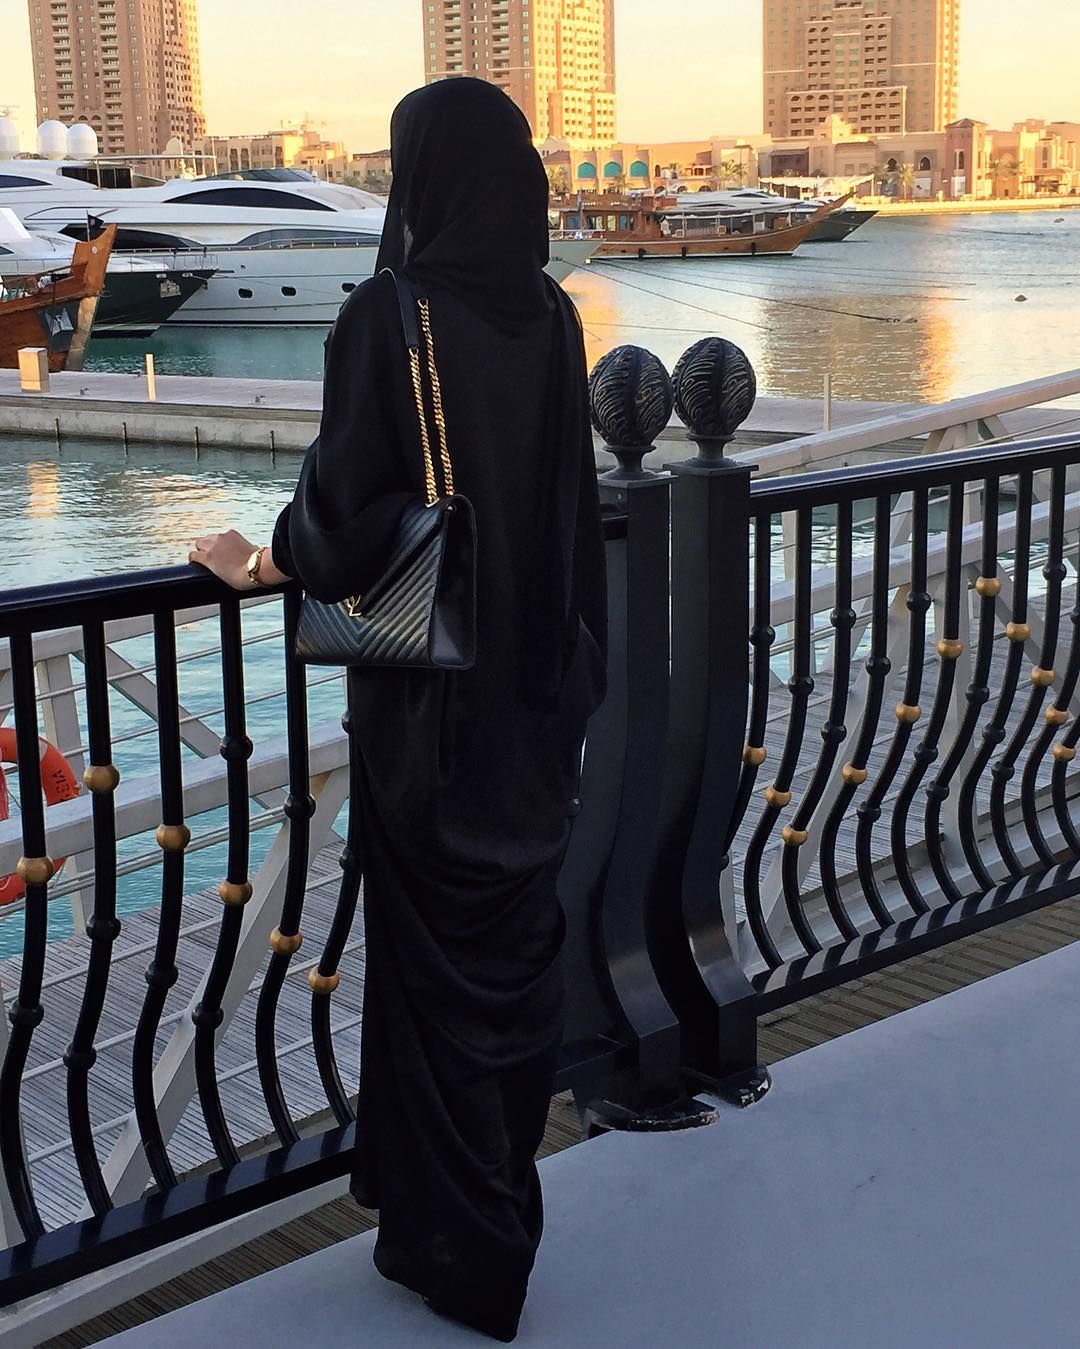 Spending my last few hours in Qatar #whathindwore | Elegant abayas, Hijab  outfit, Hijab fashion